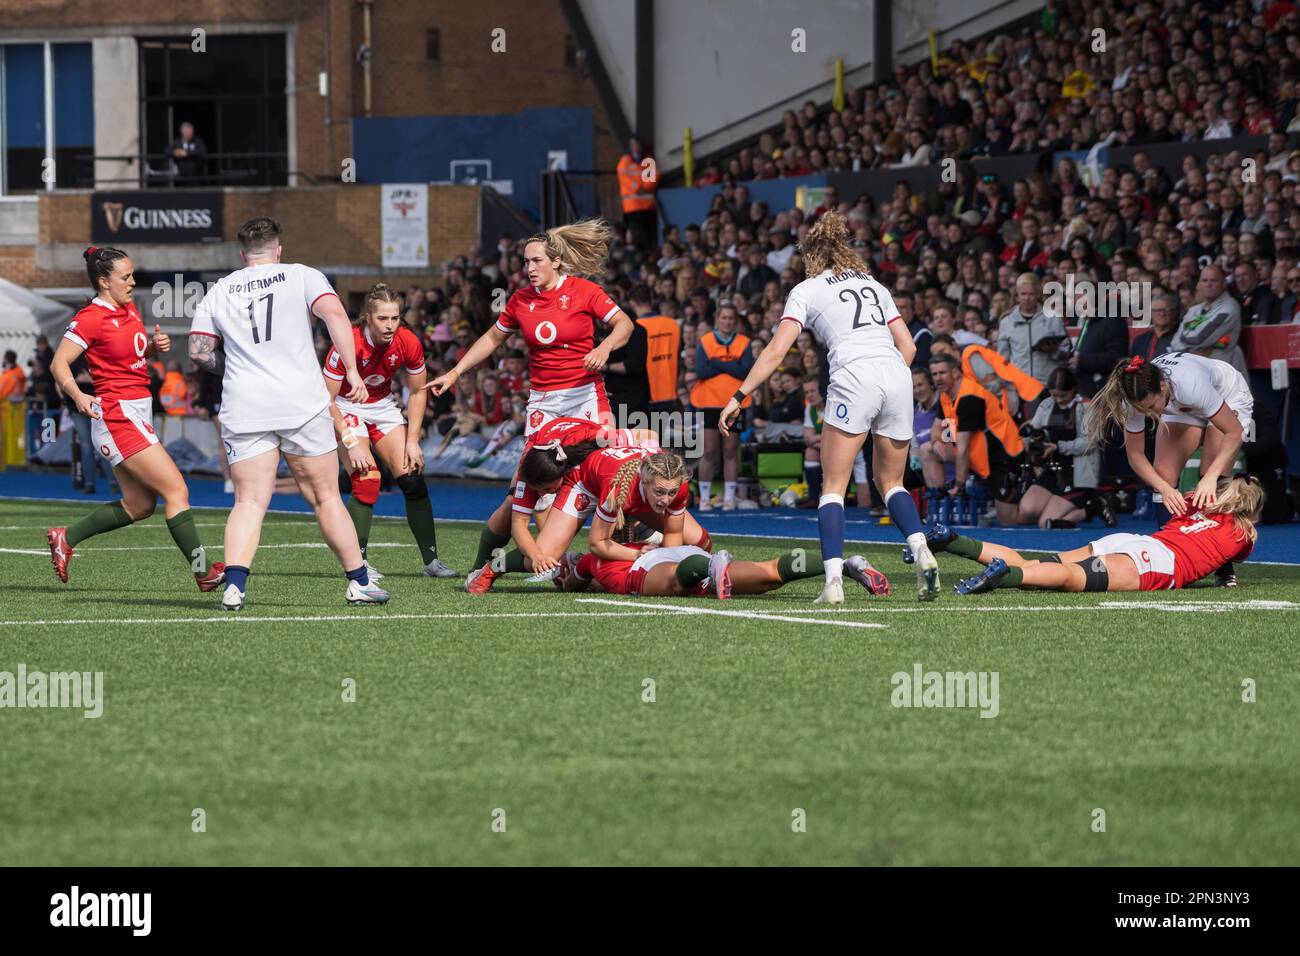 Cardiff, Wales. 15th April 2023. Players during the TikTok Women’s Six Nations rugby match, Wales versus England at Cardiff Park Arms Stadium in Cardiff, Wales. Credit: Sam Hardwick/Alamy Live News. Stock Photo